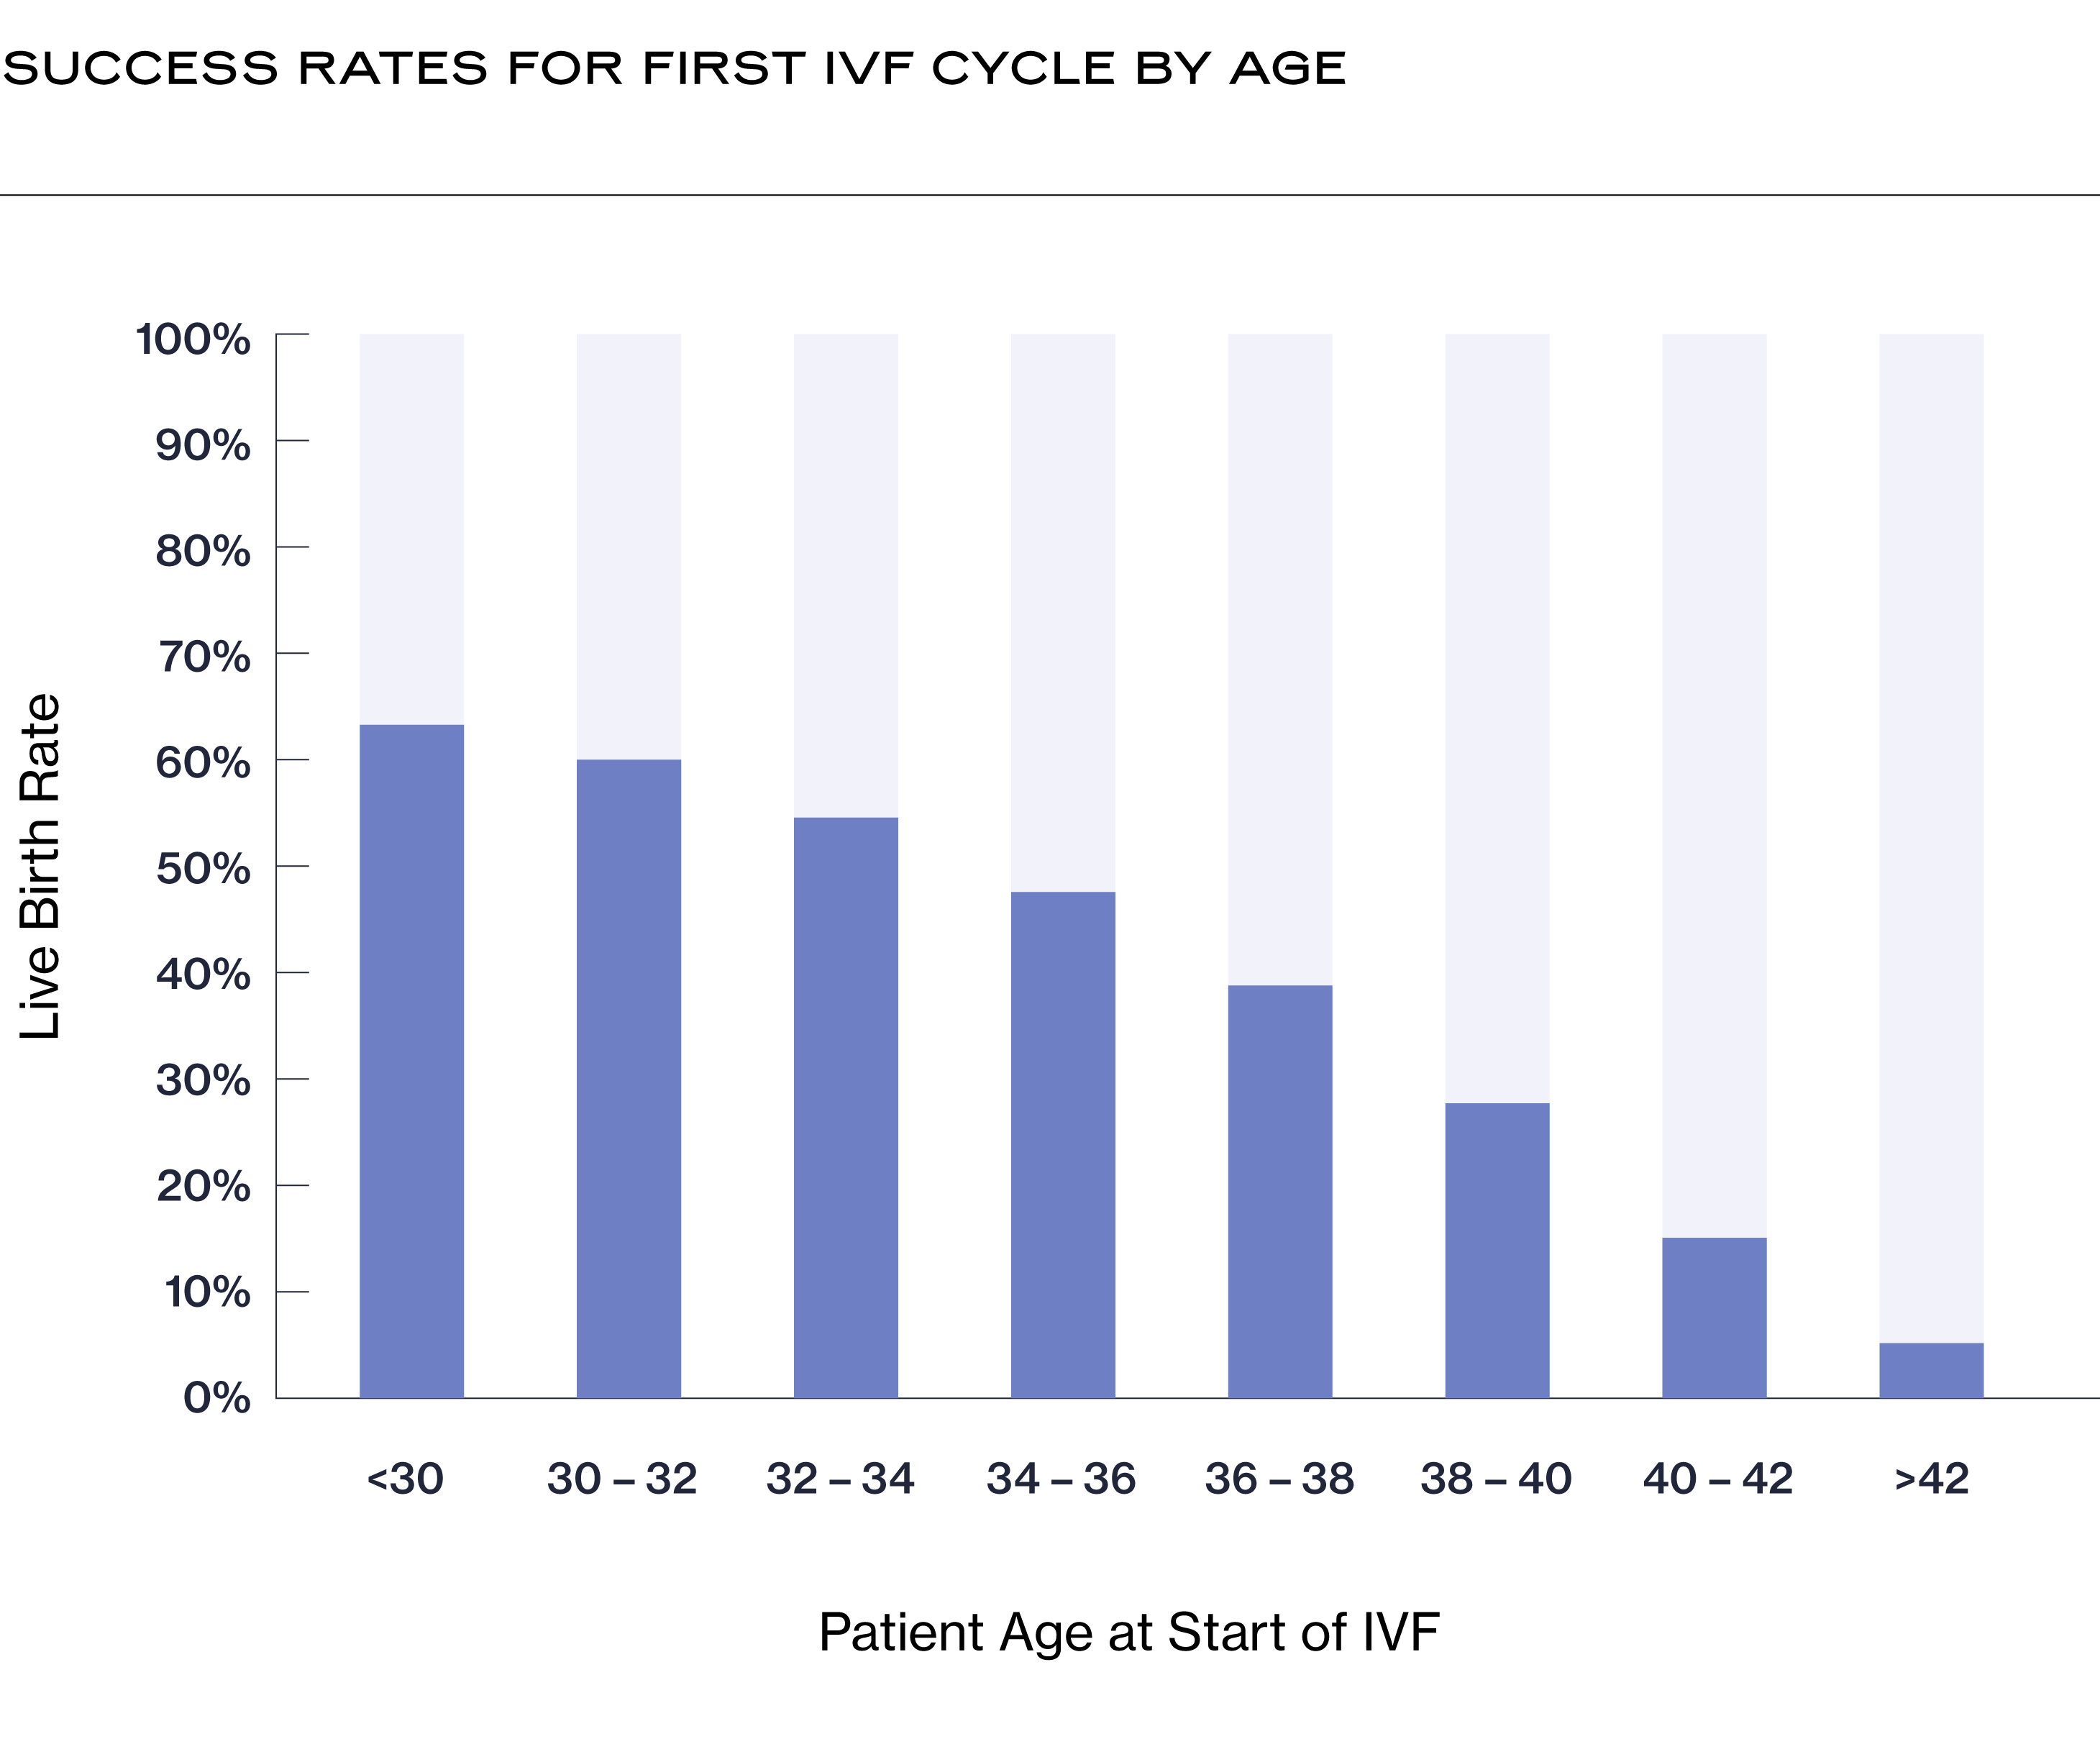 Success Rates for First IVF Cycle by Age